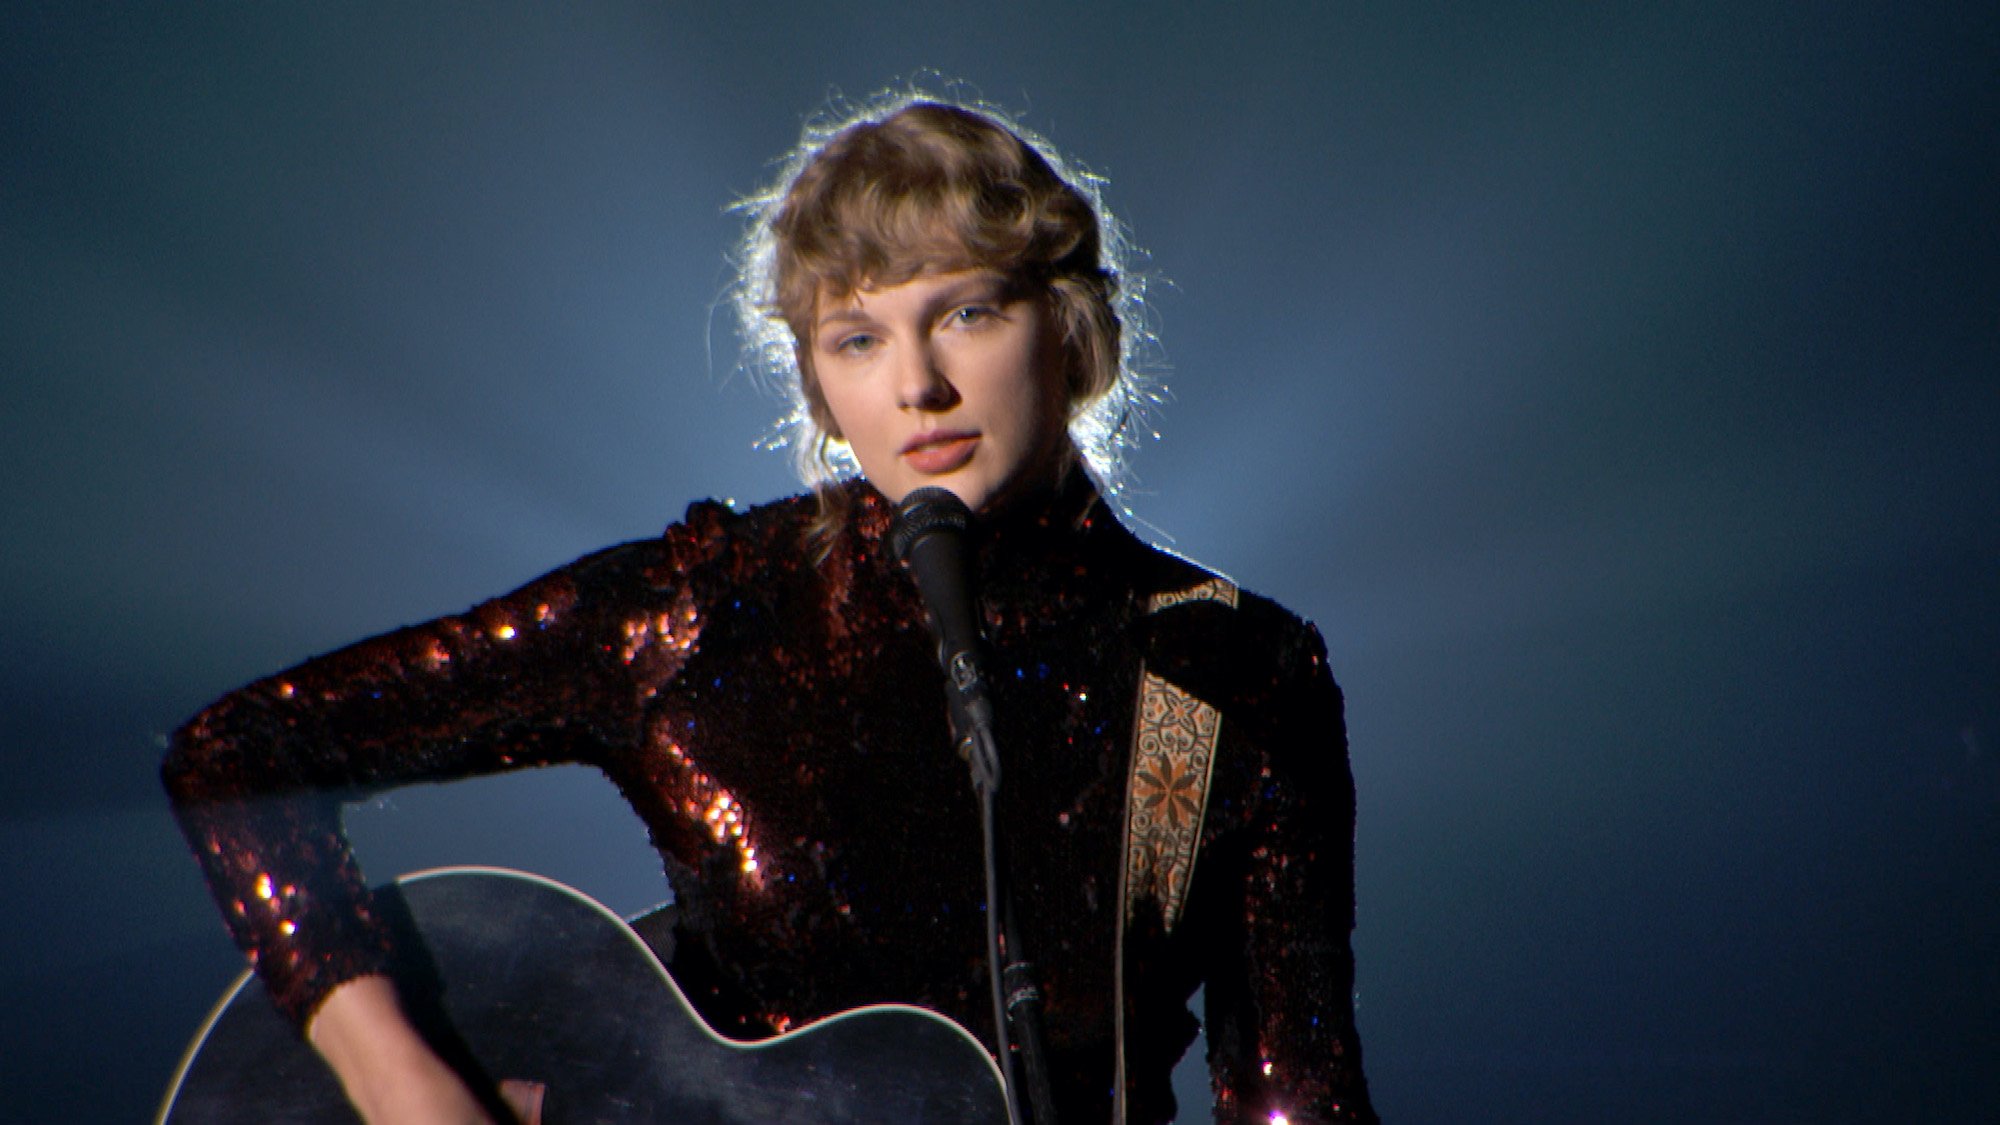 Taylor Swift performs onstage with her guitar